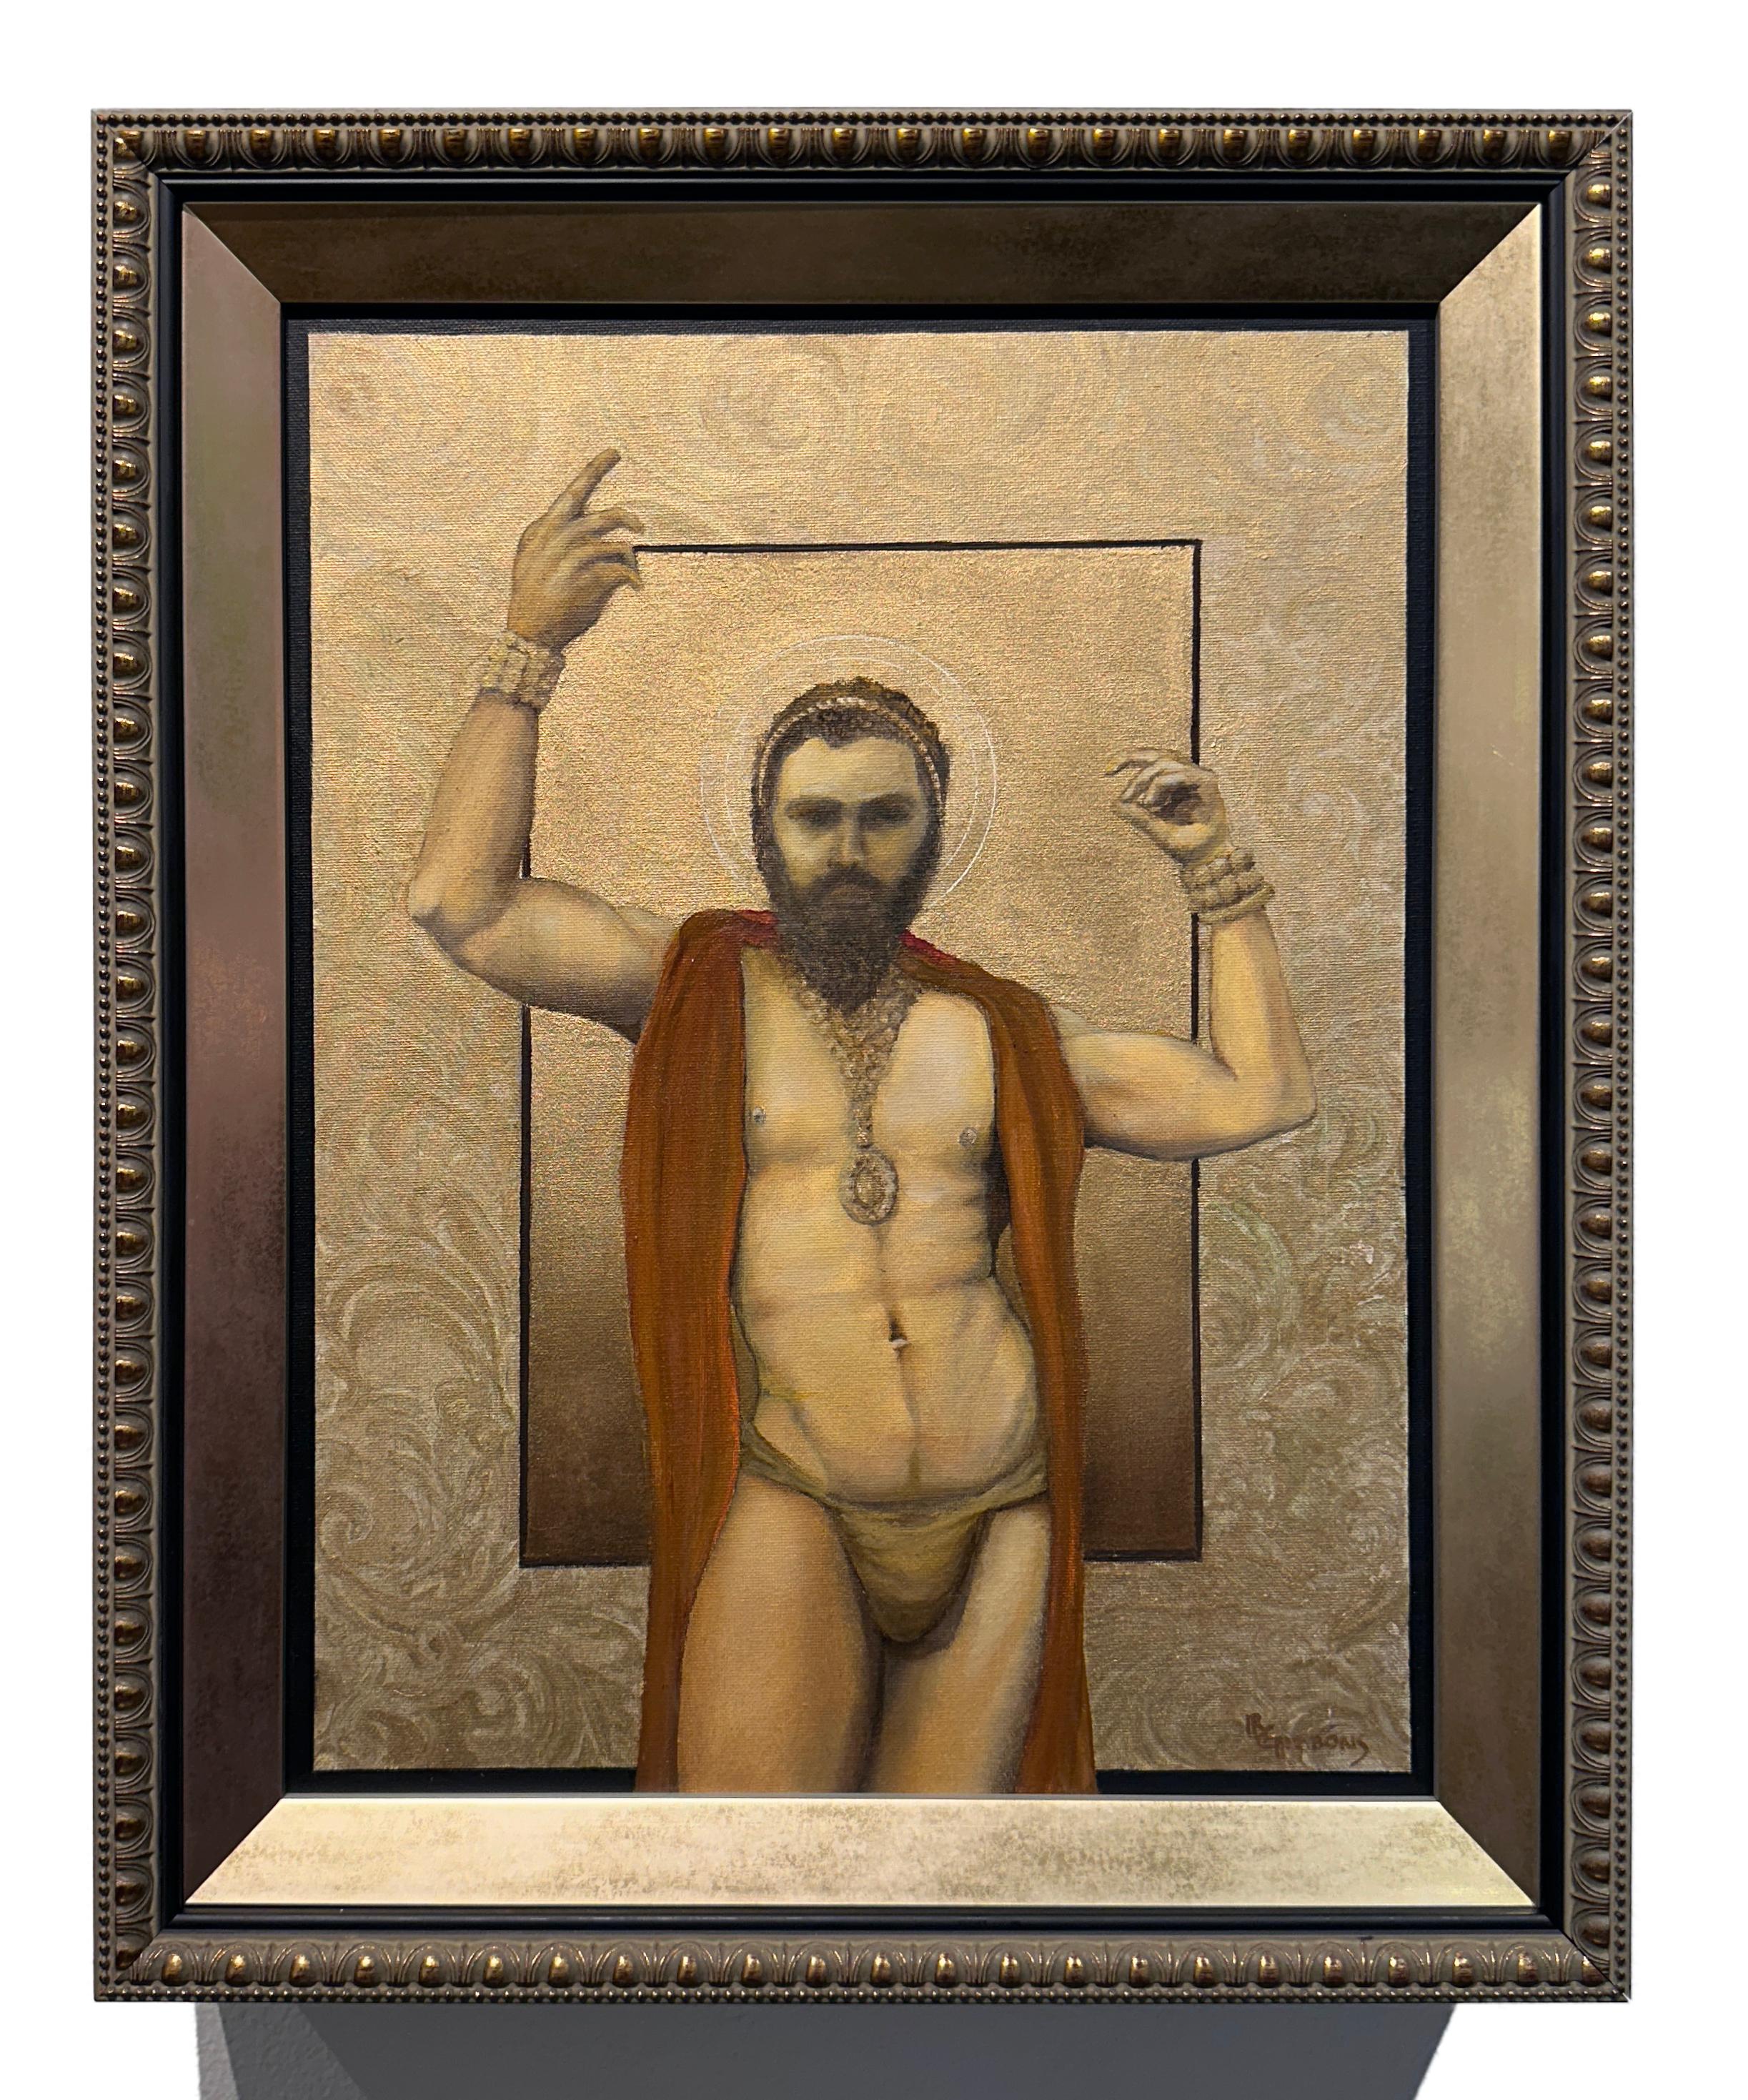 The Priest King of Knossos, Muscular Male, Original Oil on Canvas - Contemporain Painting par Richard Gibbons